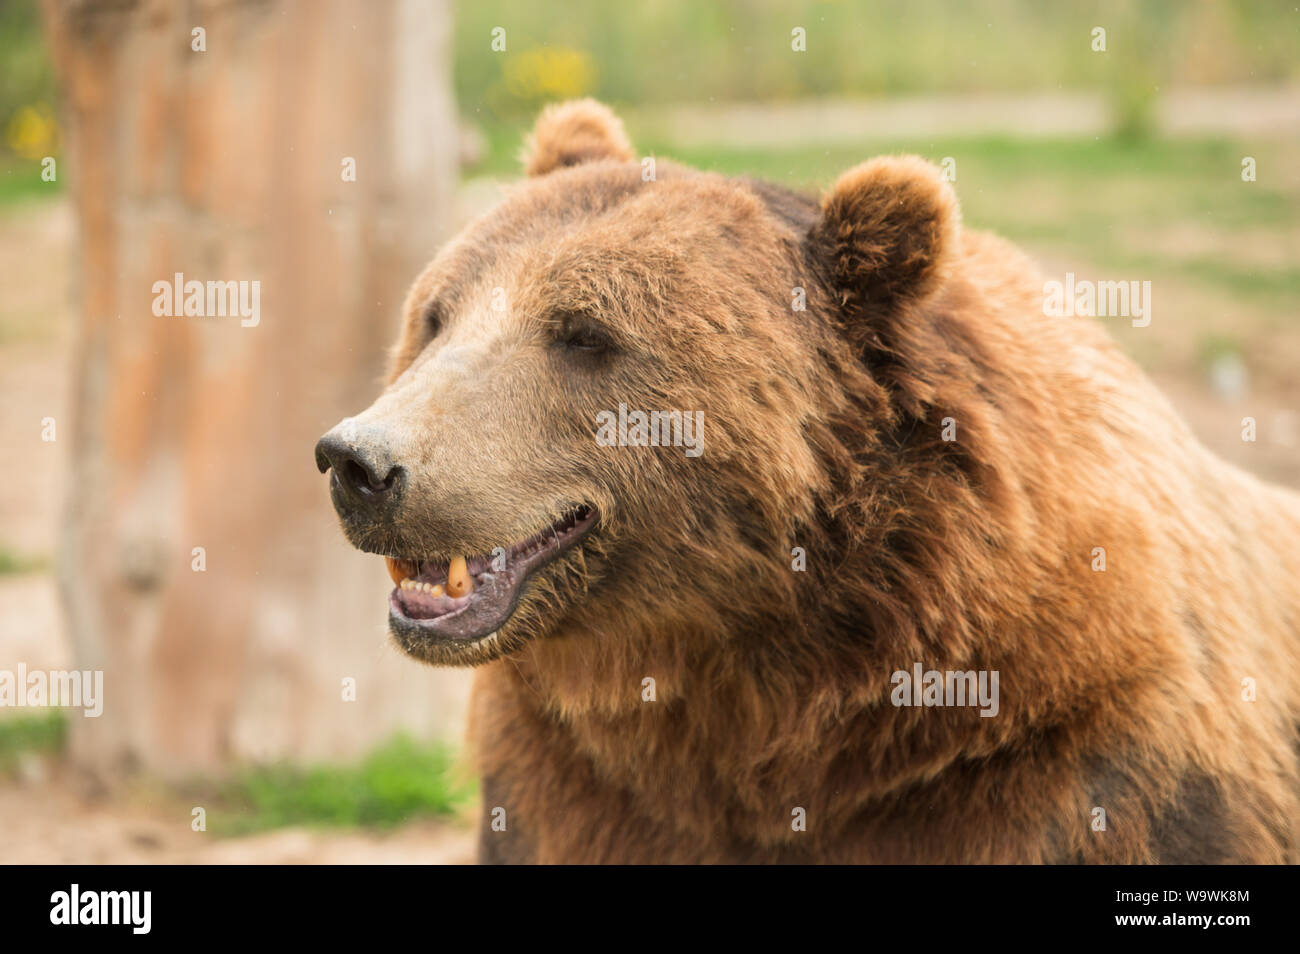 The Sequim Game Park famous waving grizzly bears.  Sequim, Washington State, USA. Stock Photo